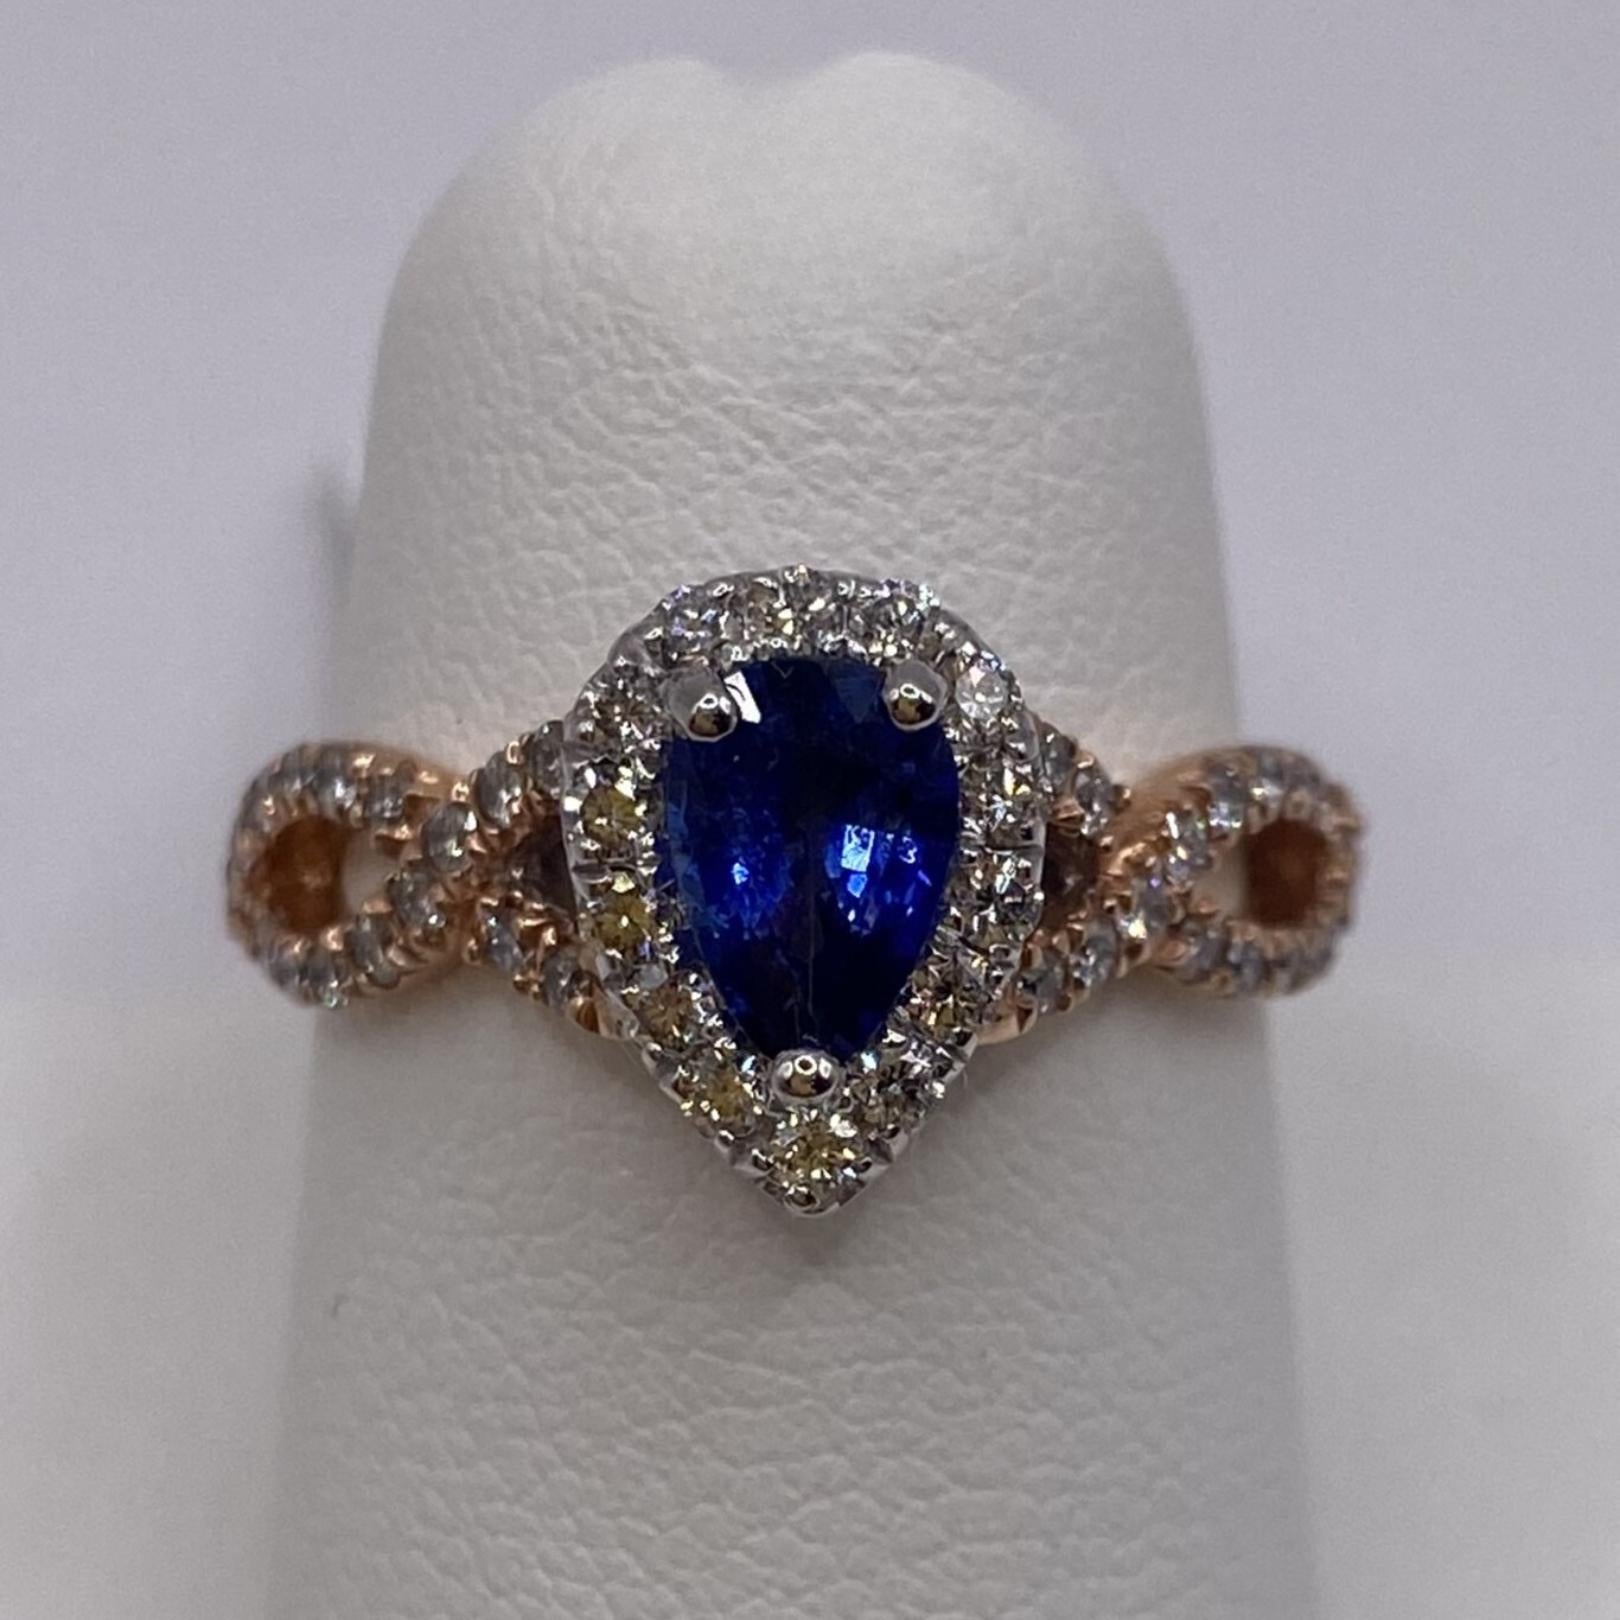 14KT White & Rose Gold
Finger Size: 6.5

Number of Pear Shape Sapphires: 1
Carat Weight: 0.72ct
Stone Size: 7.0 x 4.5mm

Number of Round Diamonds: 46
Carat Weight: 0.46ctw

A .72ct pear shape bright blue sapphire is framed by a pave set halo